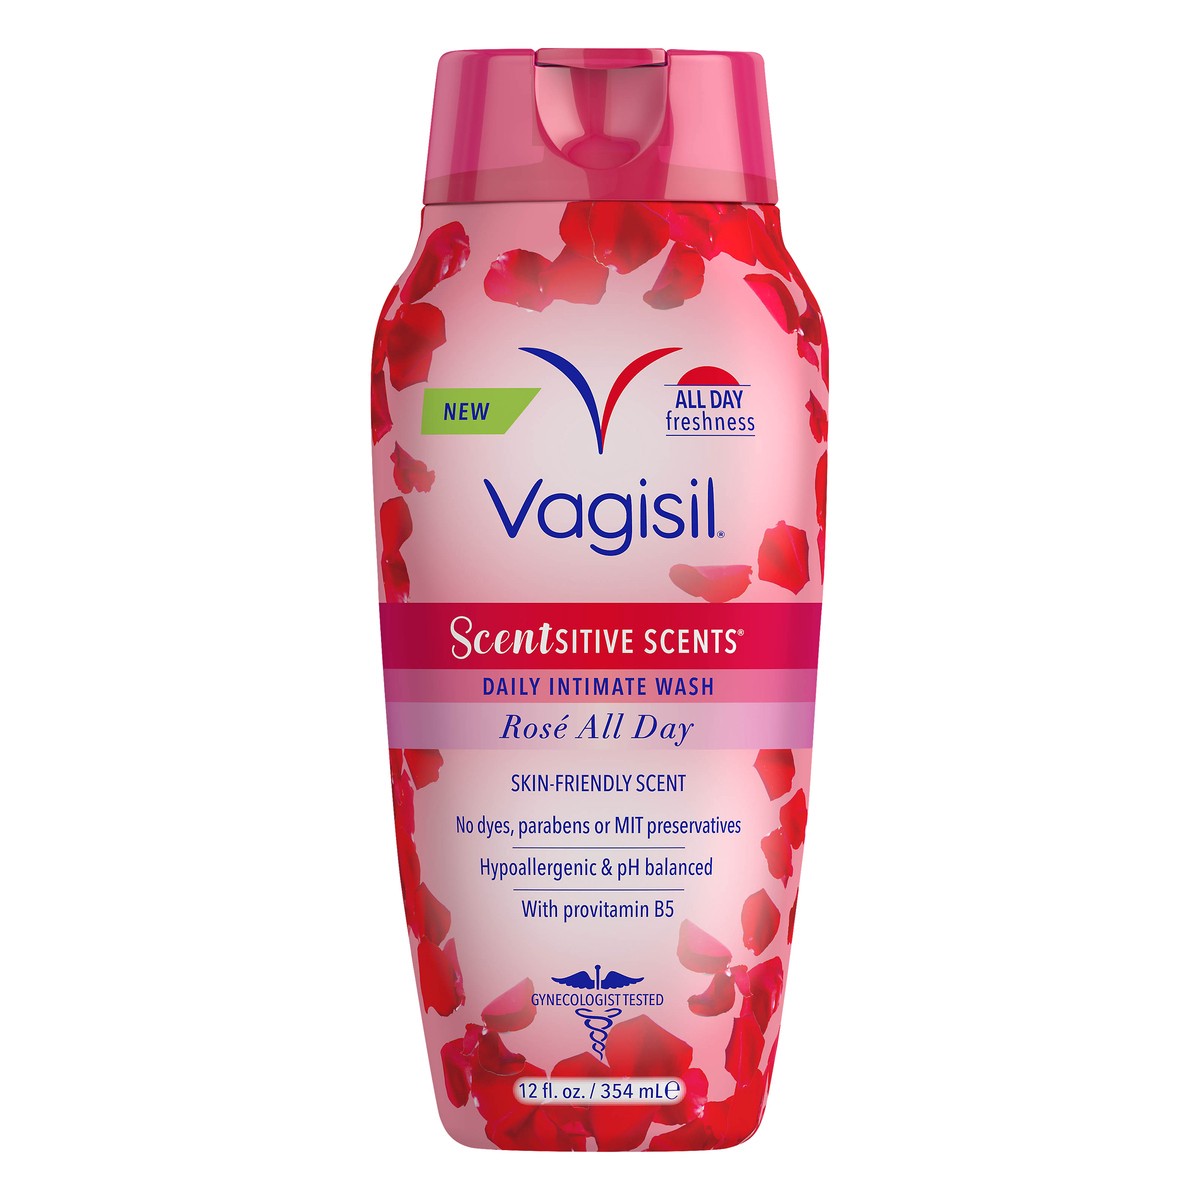 slide 1 of 8, Vagisil Scentsitive Scents Rose All Day Daily Intimate Wash 12 oz, 12 oz